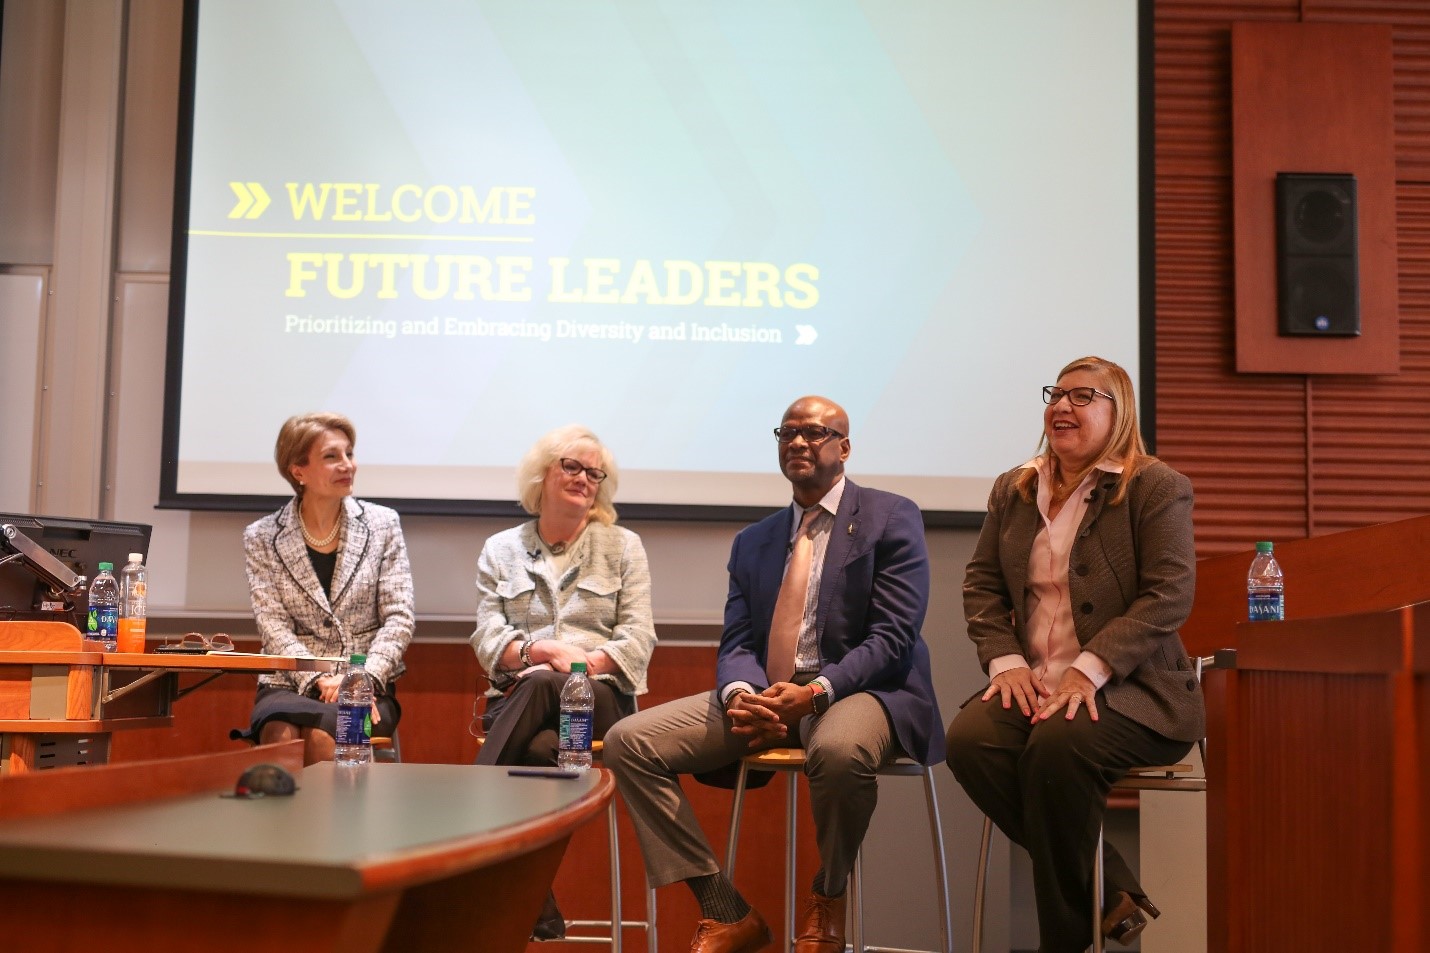 Future Leaders panelists participate in discussion on diversity and inclusion. Left to right: Maryam Alavi, Nancy Sykes, Andrew Davis, and Beatriz Rodriguez.